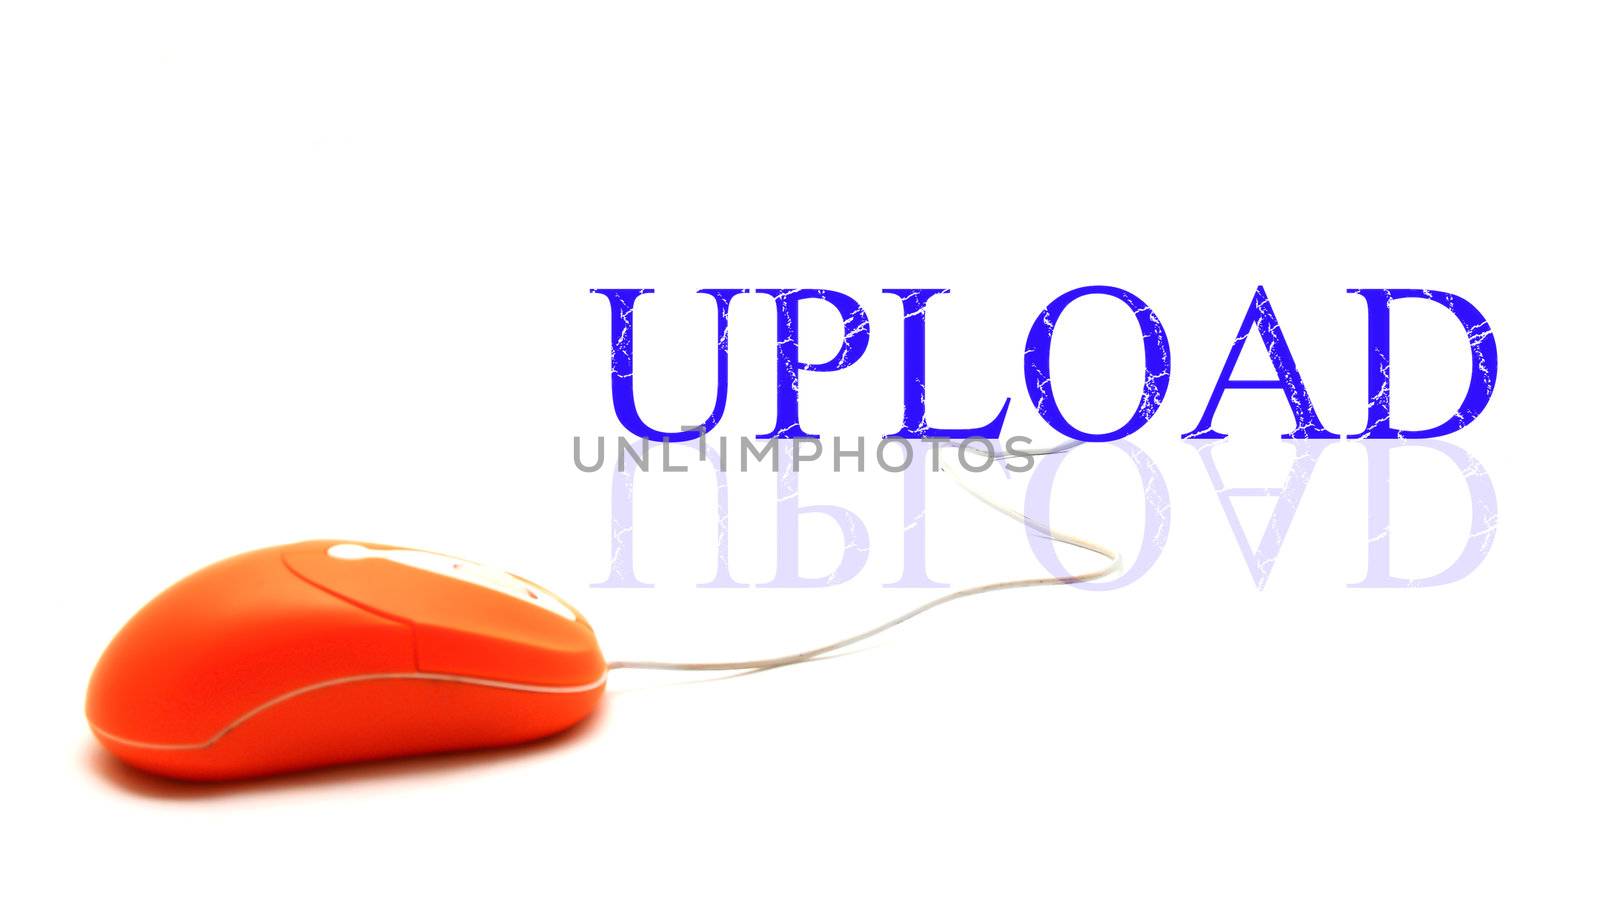 Upload word connected with pc mouse by rufous